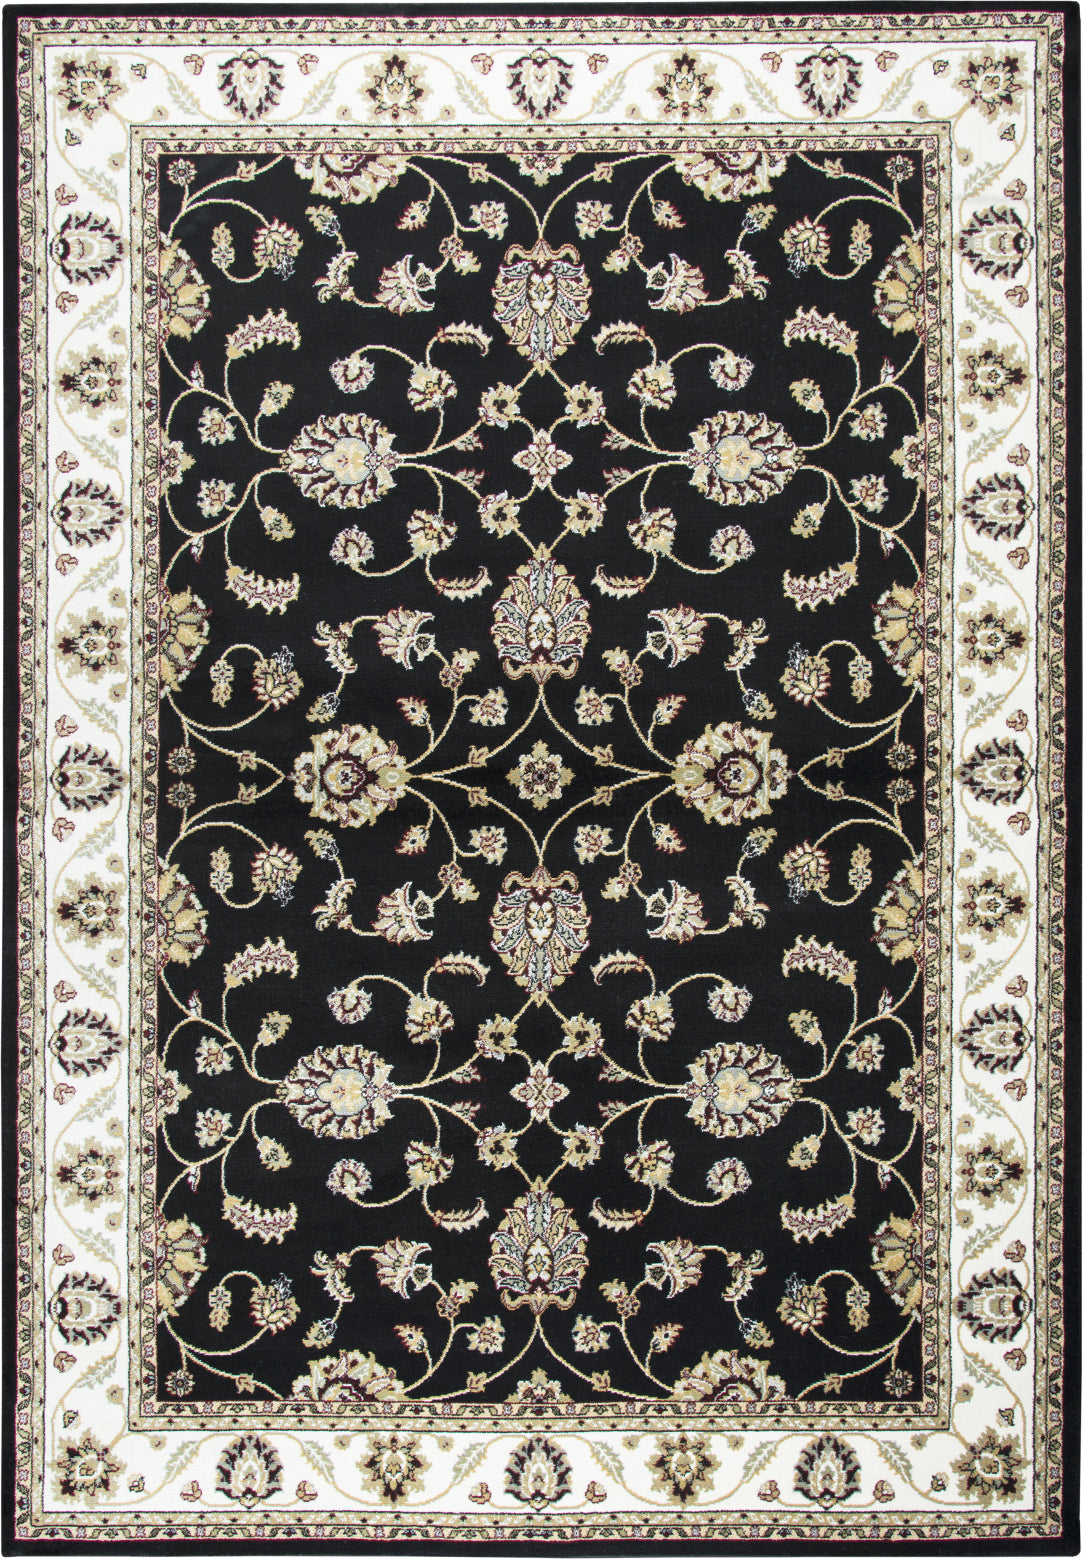 Rizzy Zenith ZH7115 Black Area Rug main image